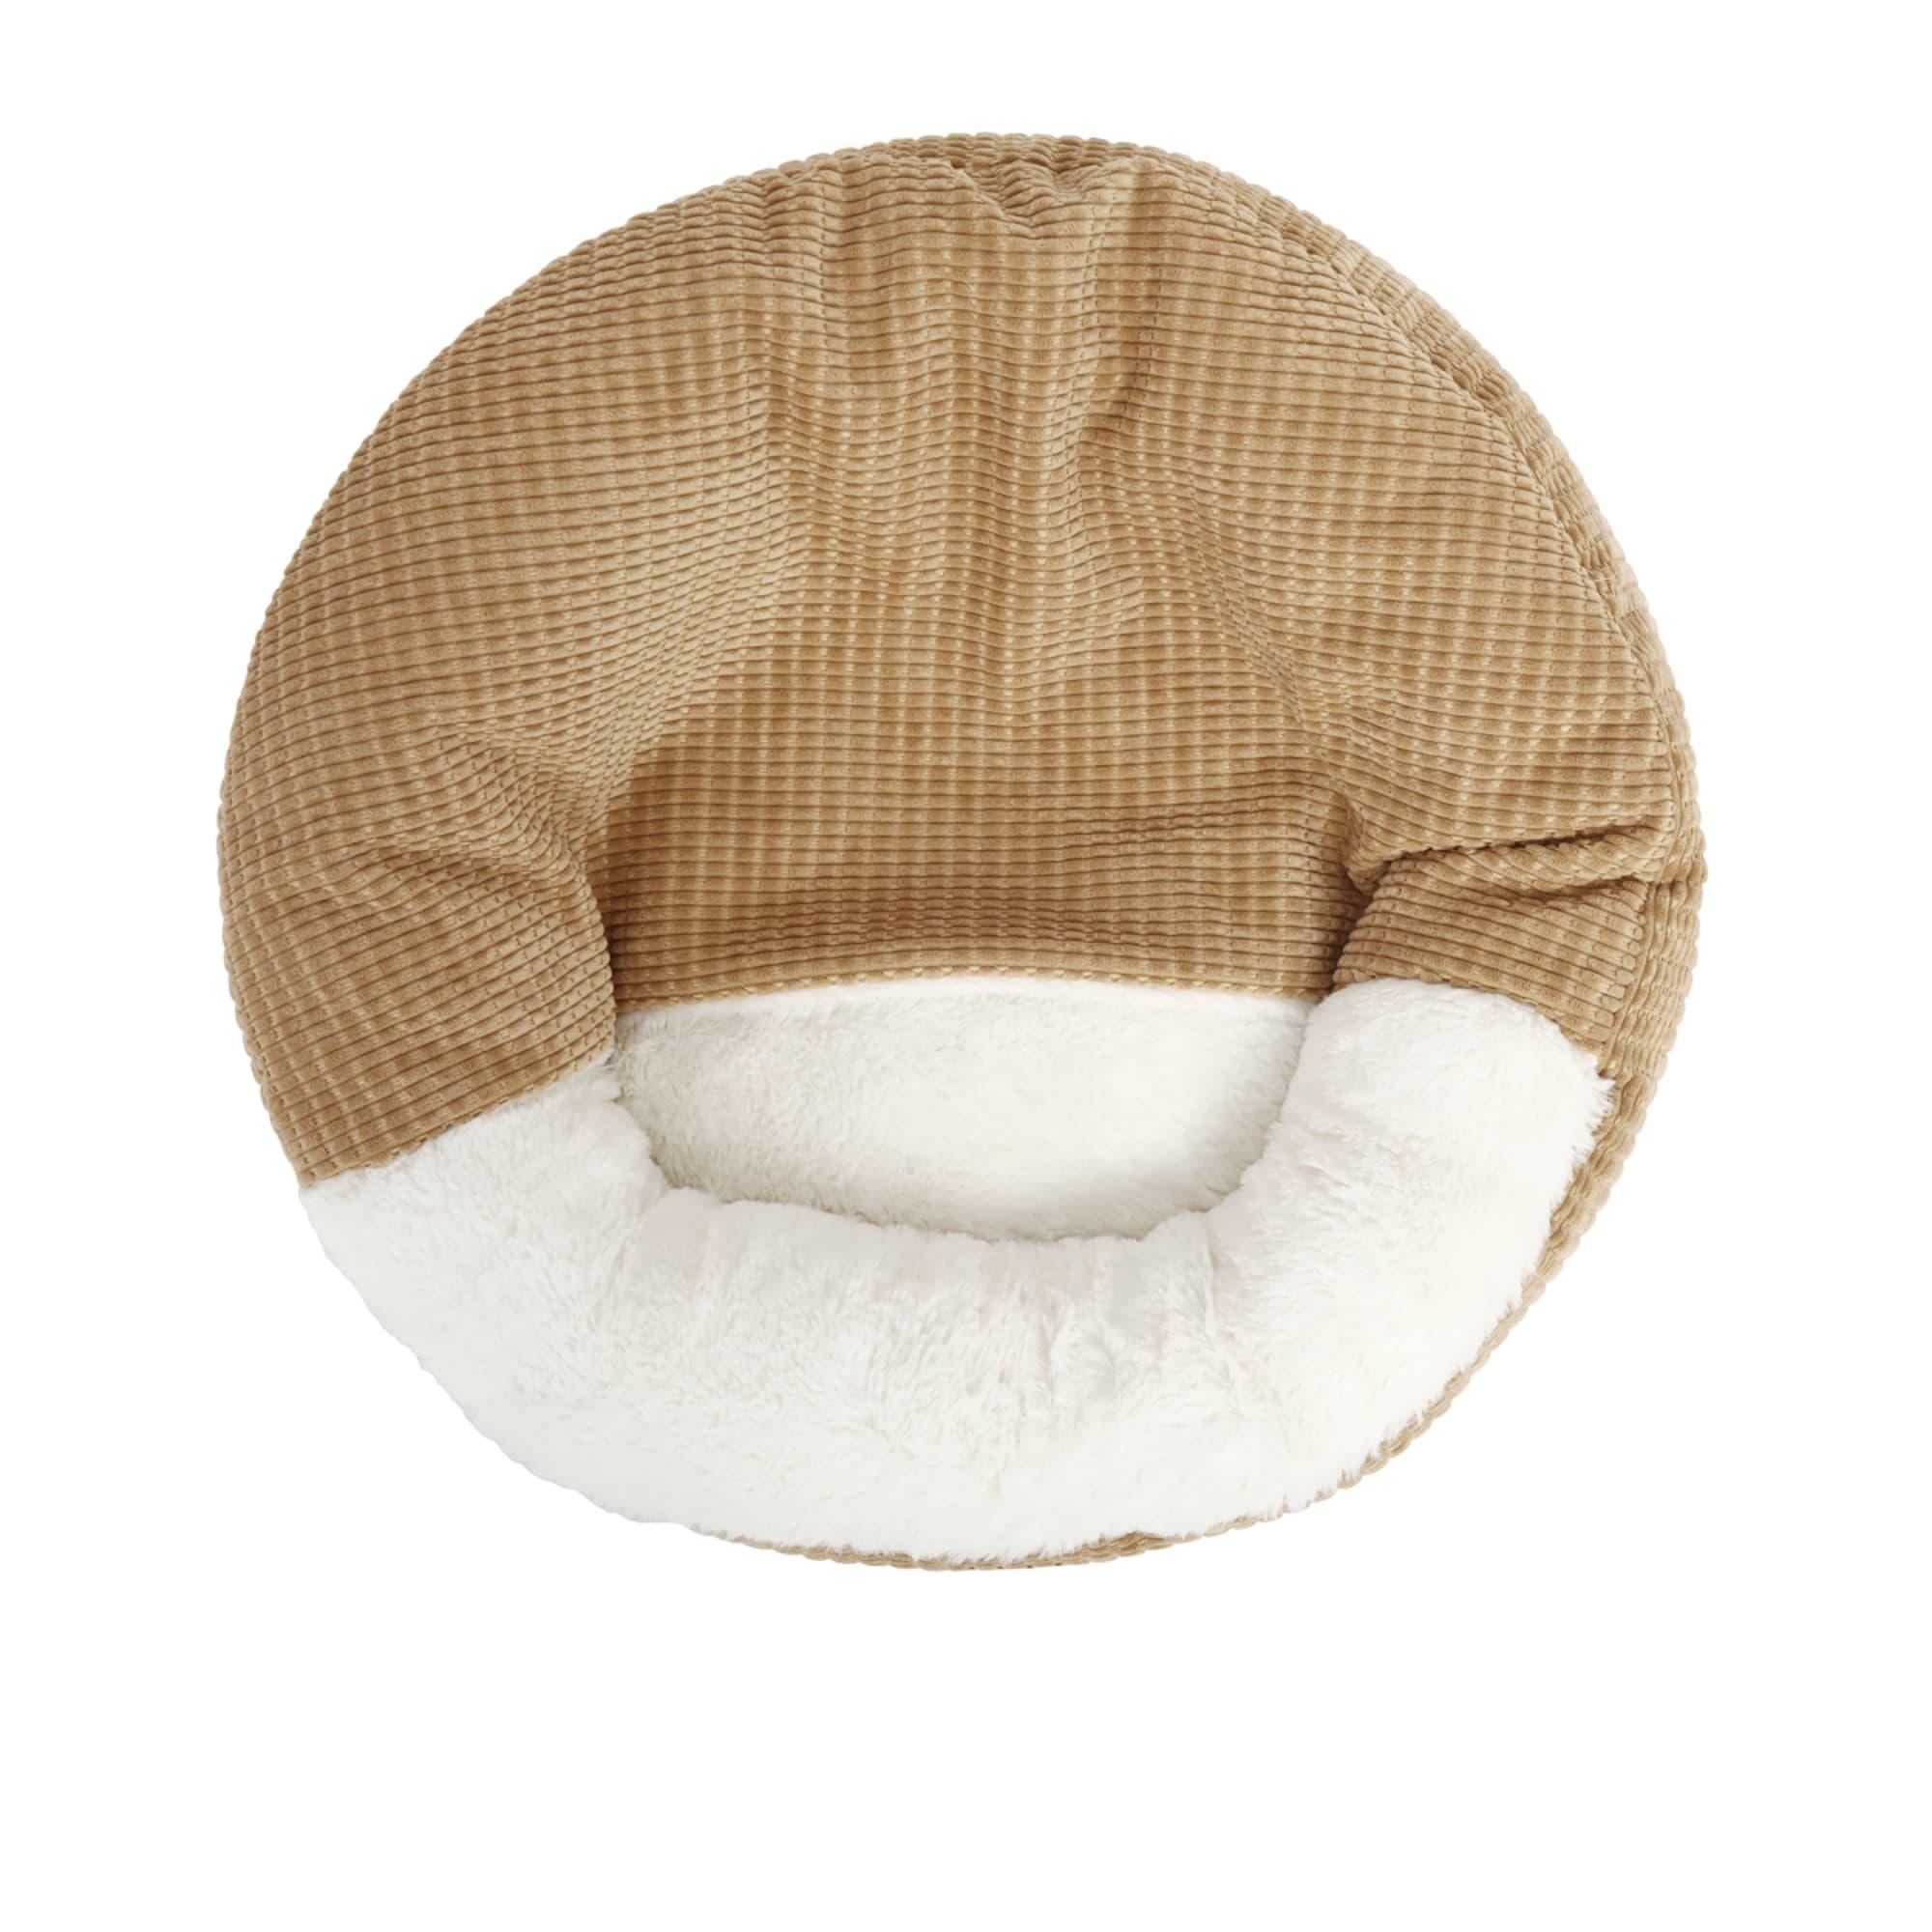 Charlie's Snookie Hooded Calming Dog Bed Small Iced Coffee Brown Image 3